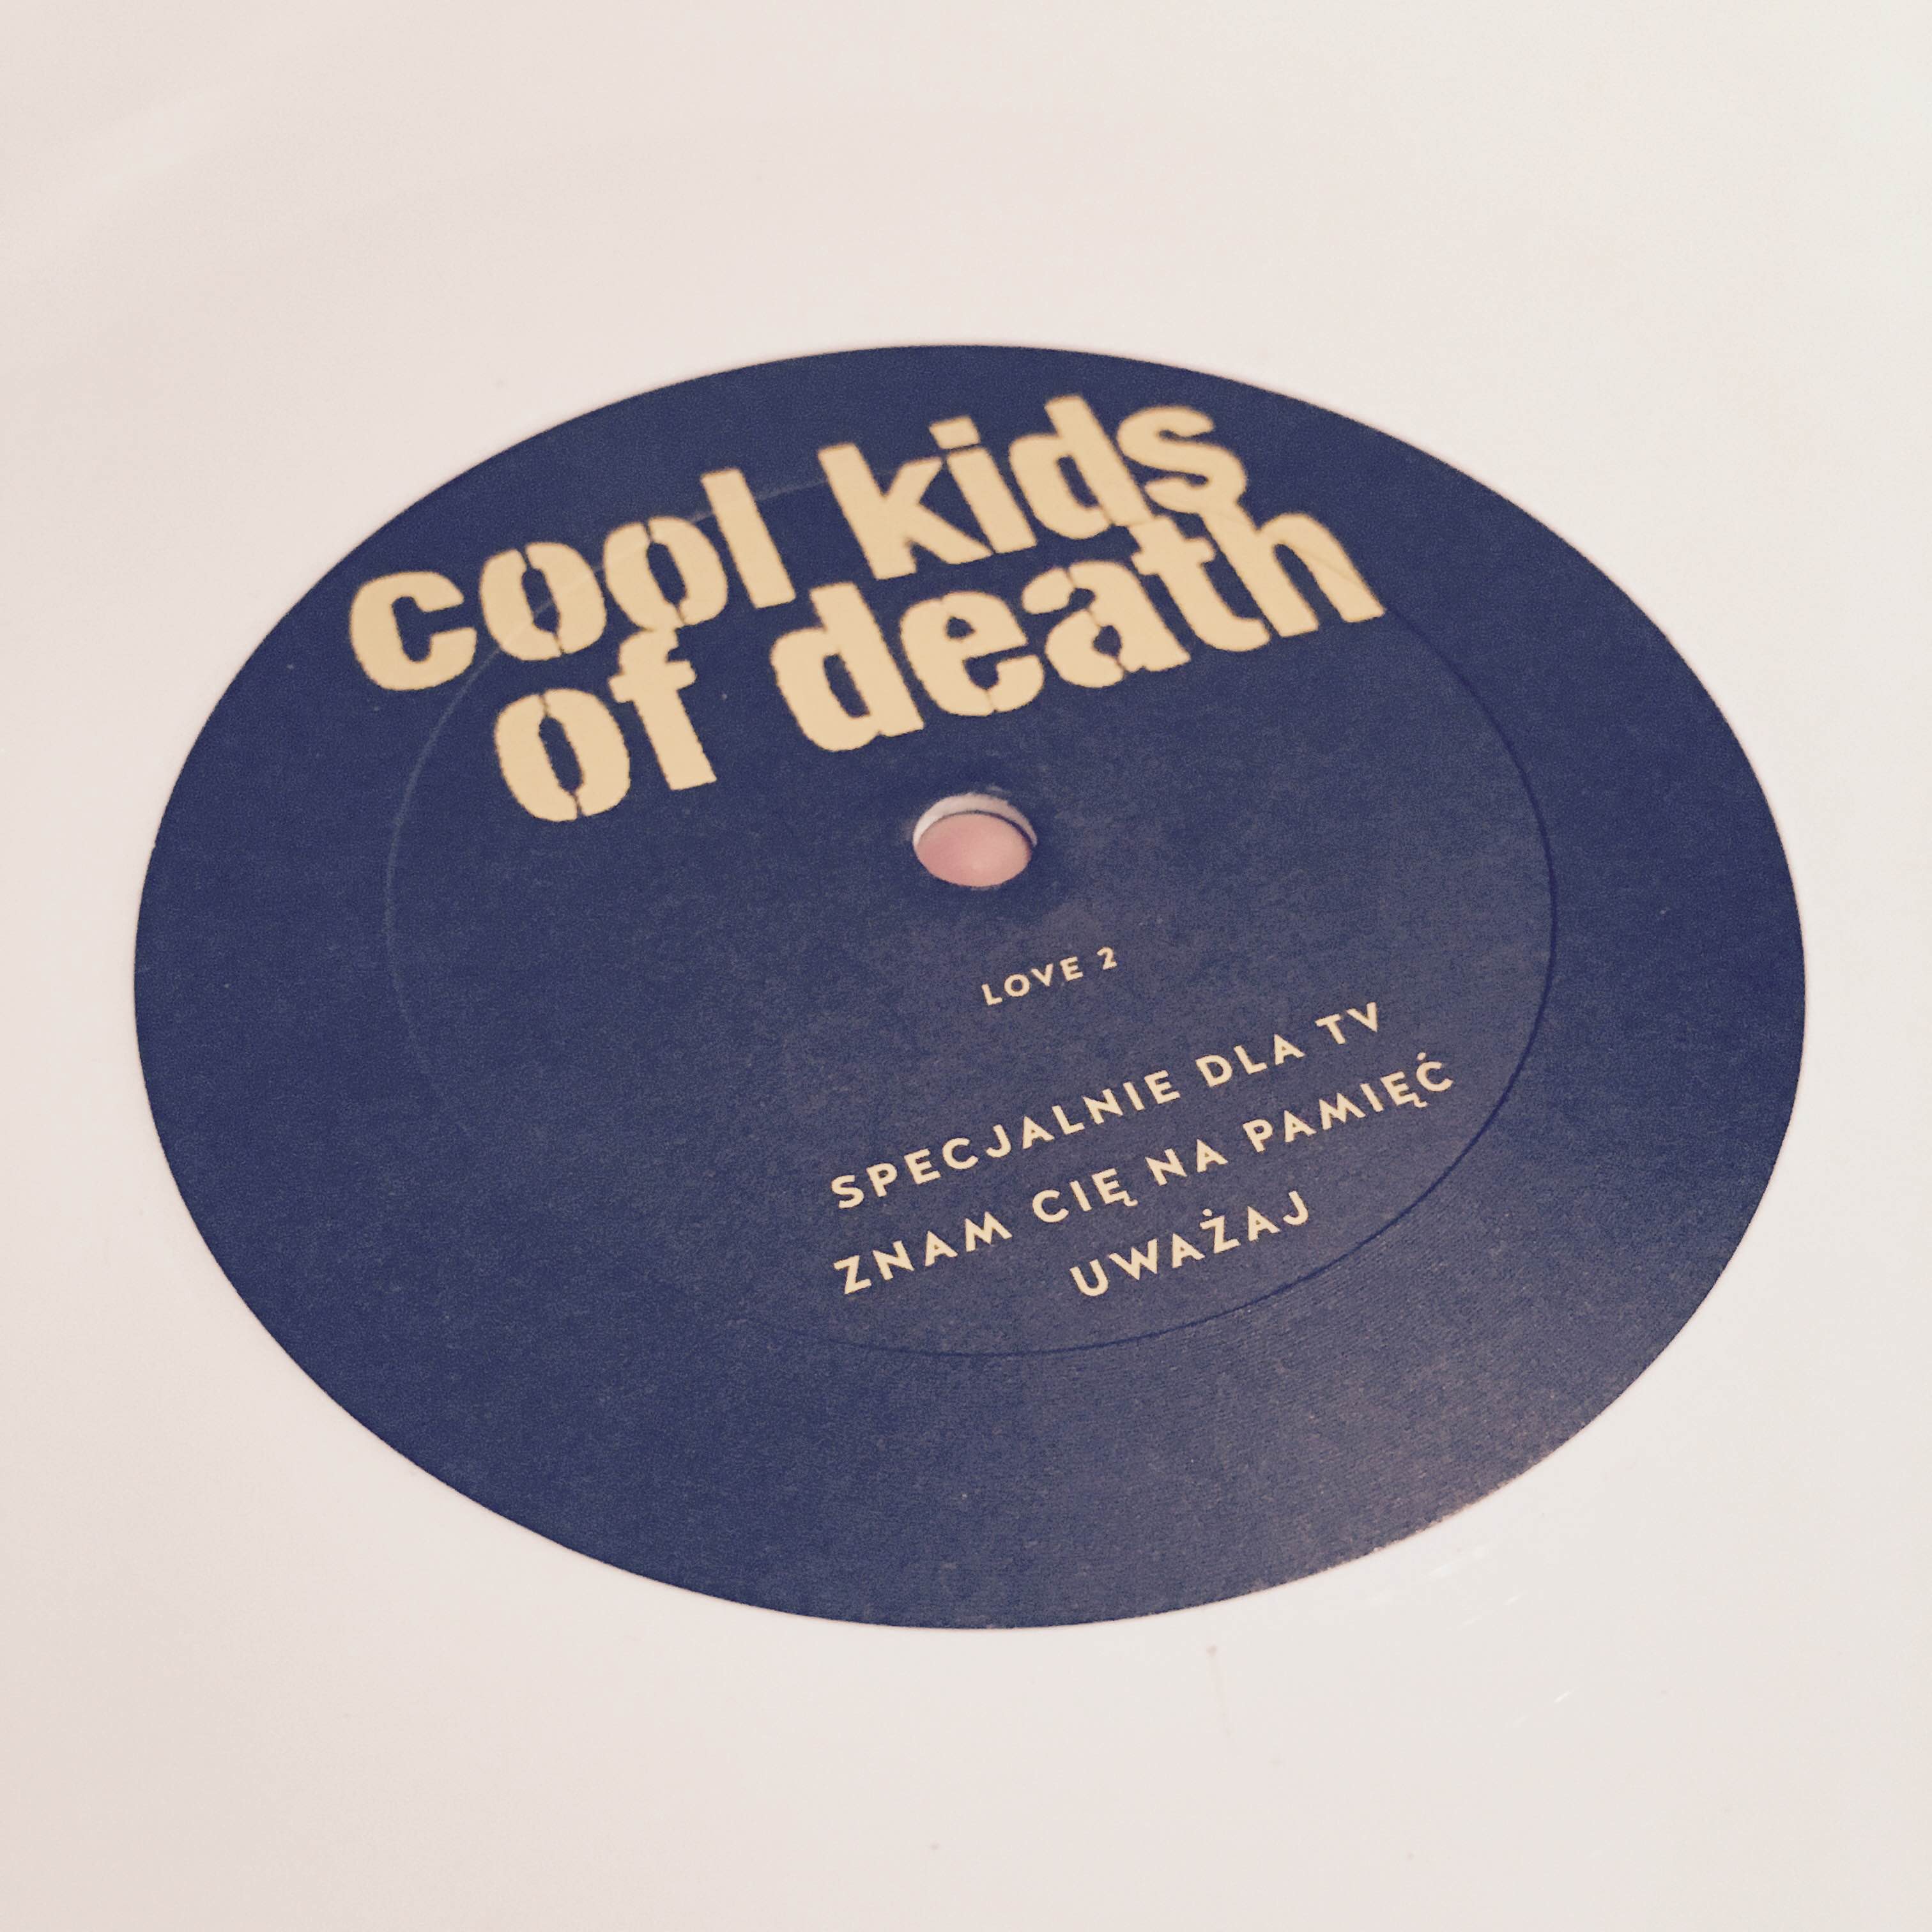 Cool Kids of Death 